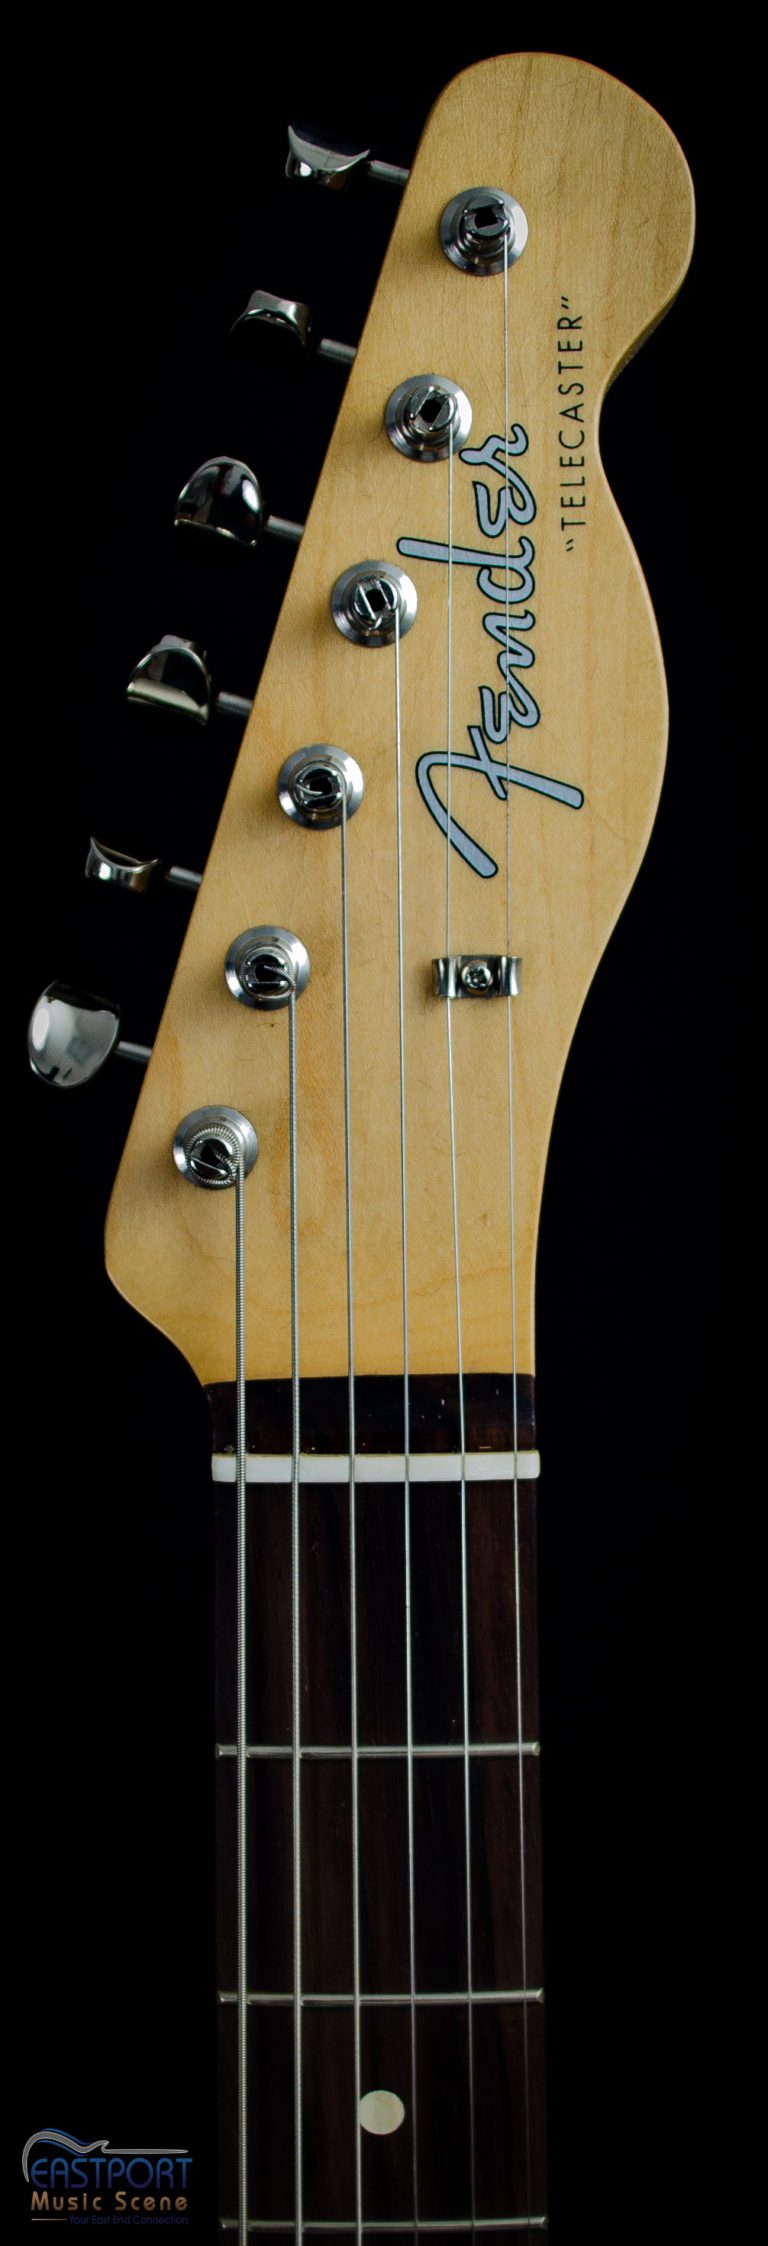 A close up of the neck and headstock of an electric guitar.